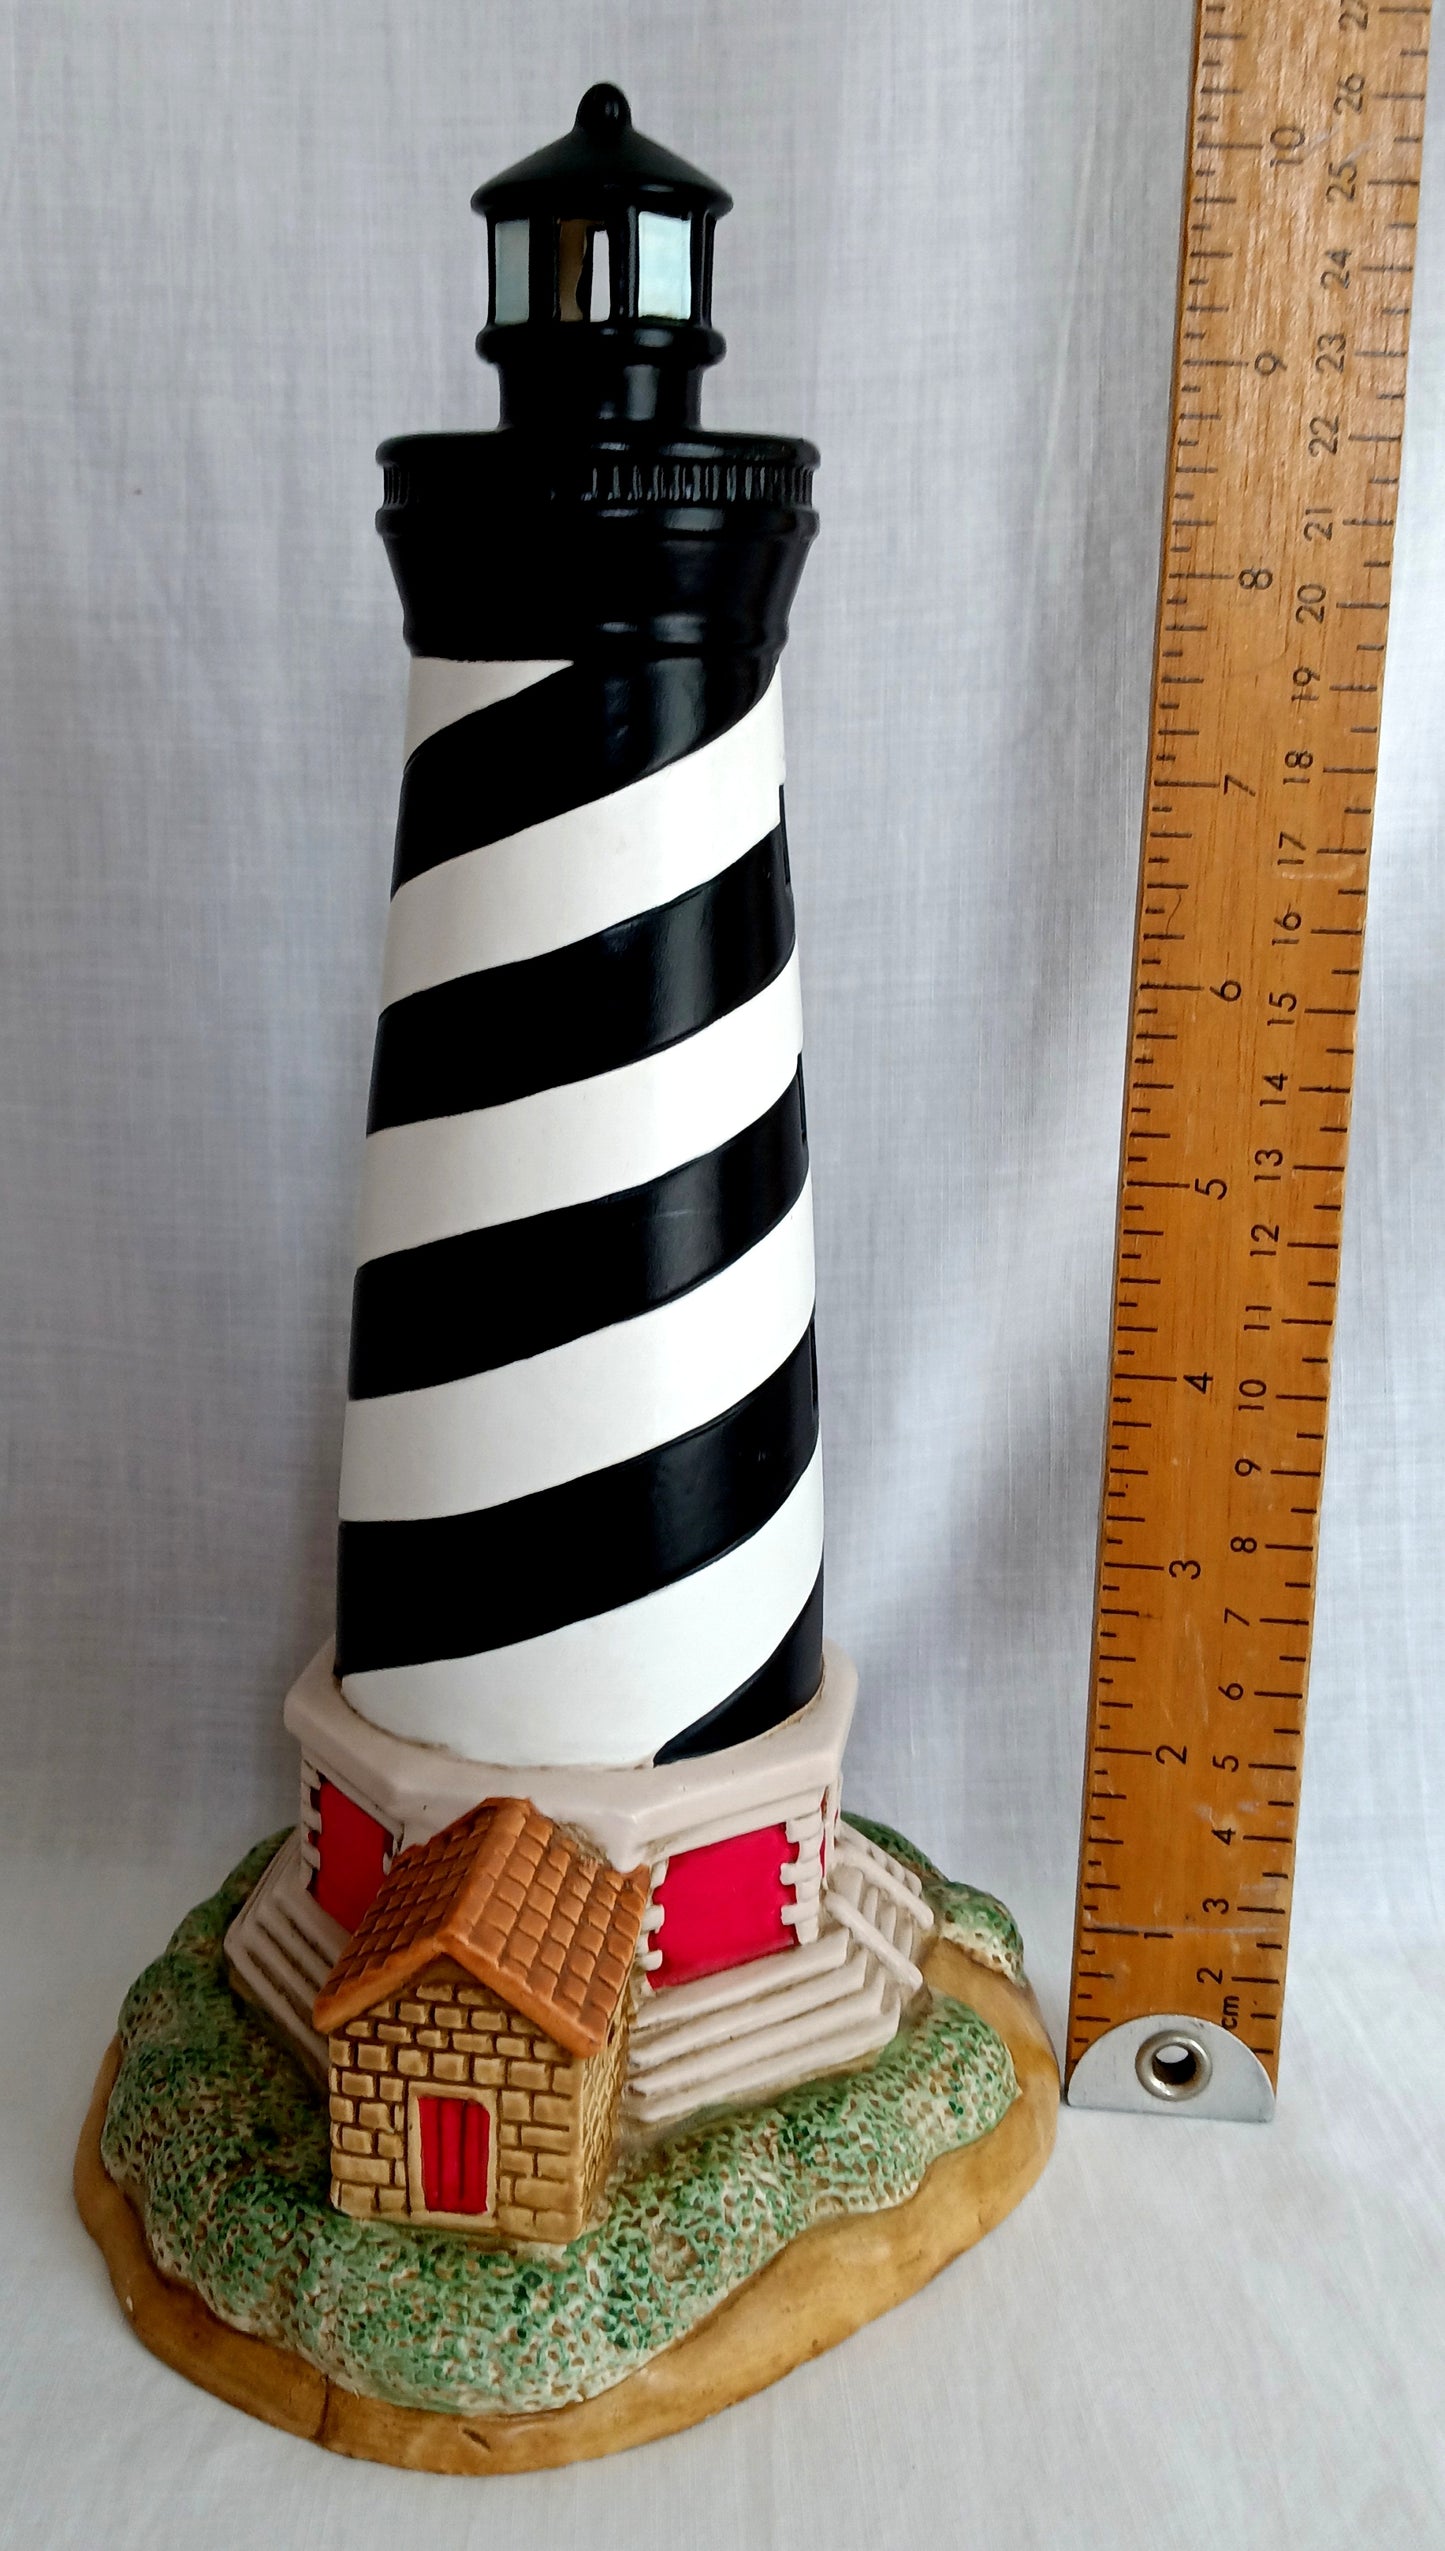 Vintage Lefton 1991 Portable Lighthouse Lamp Hand Painted Ceramic In Line Switch Historic American Replica Cape Hatteras Light 1870 #00133